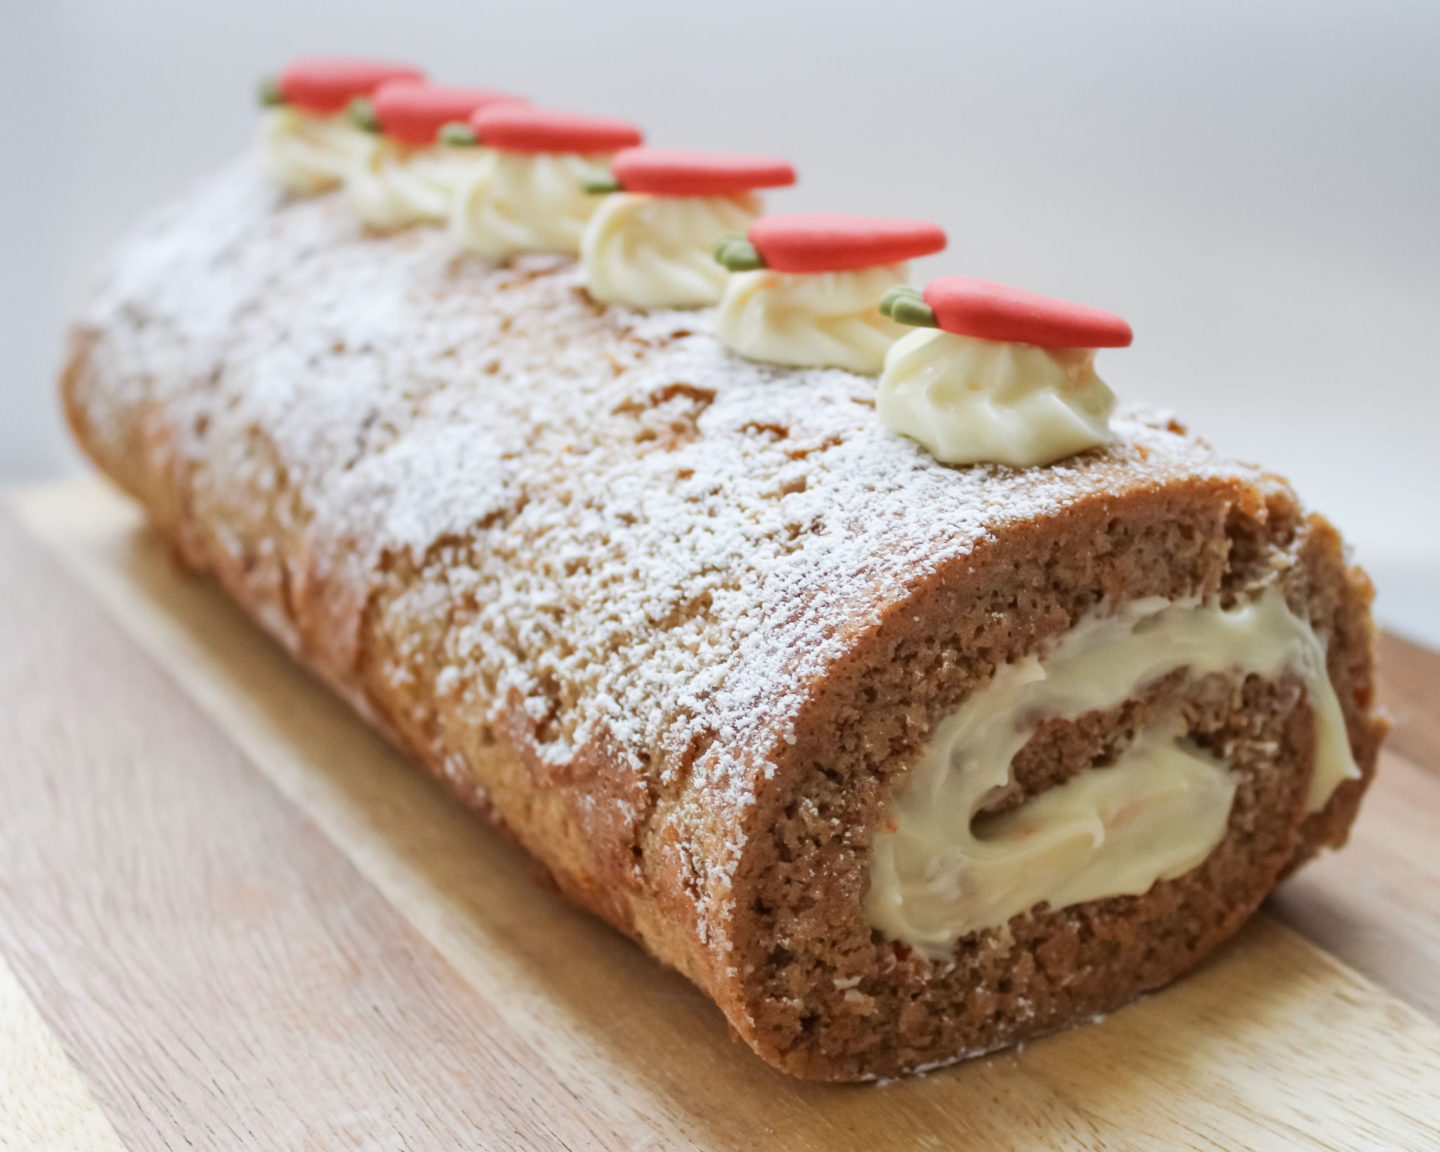 Fully decorated carrot cake Swiss roll with cream cheese frosting/icing